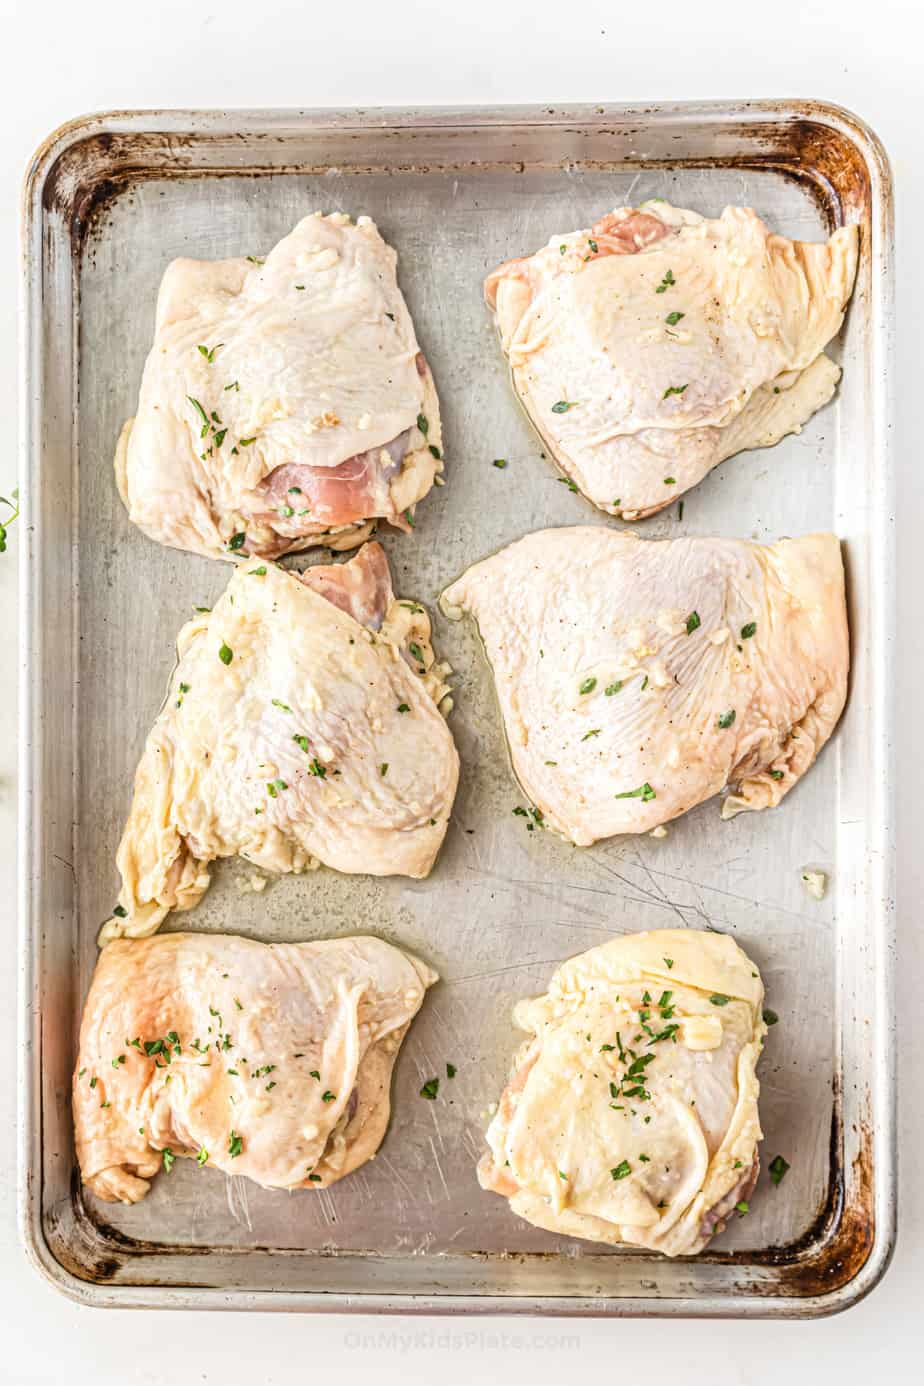 Raw chicken thighs with herbs on pan